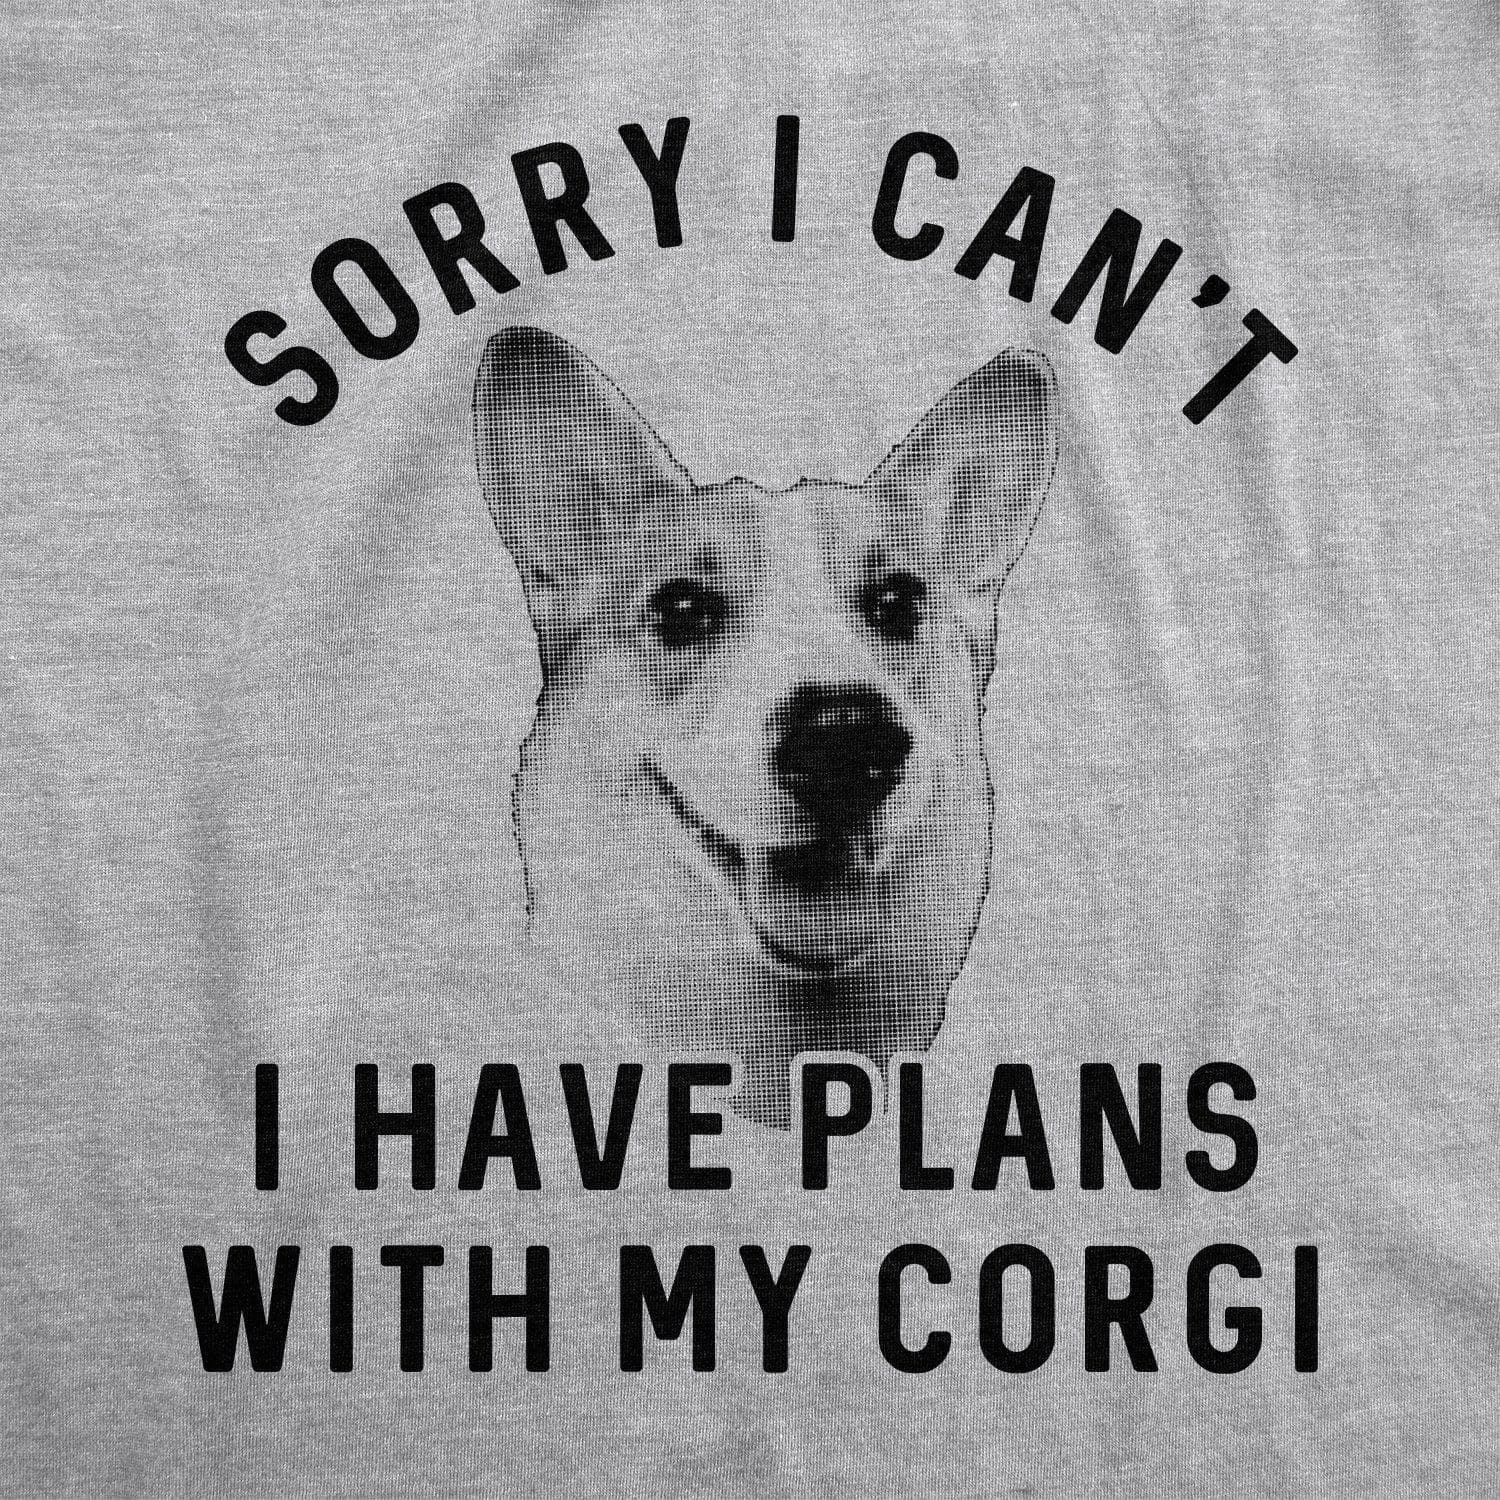 Sorry I Can't I Have Plans With My Corgi Men's Tshirt - Crazy Dog T-Shirts